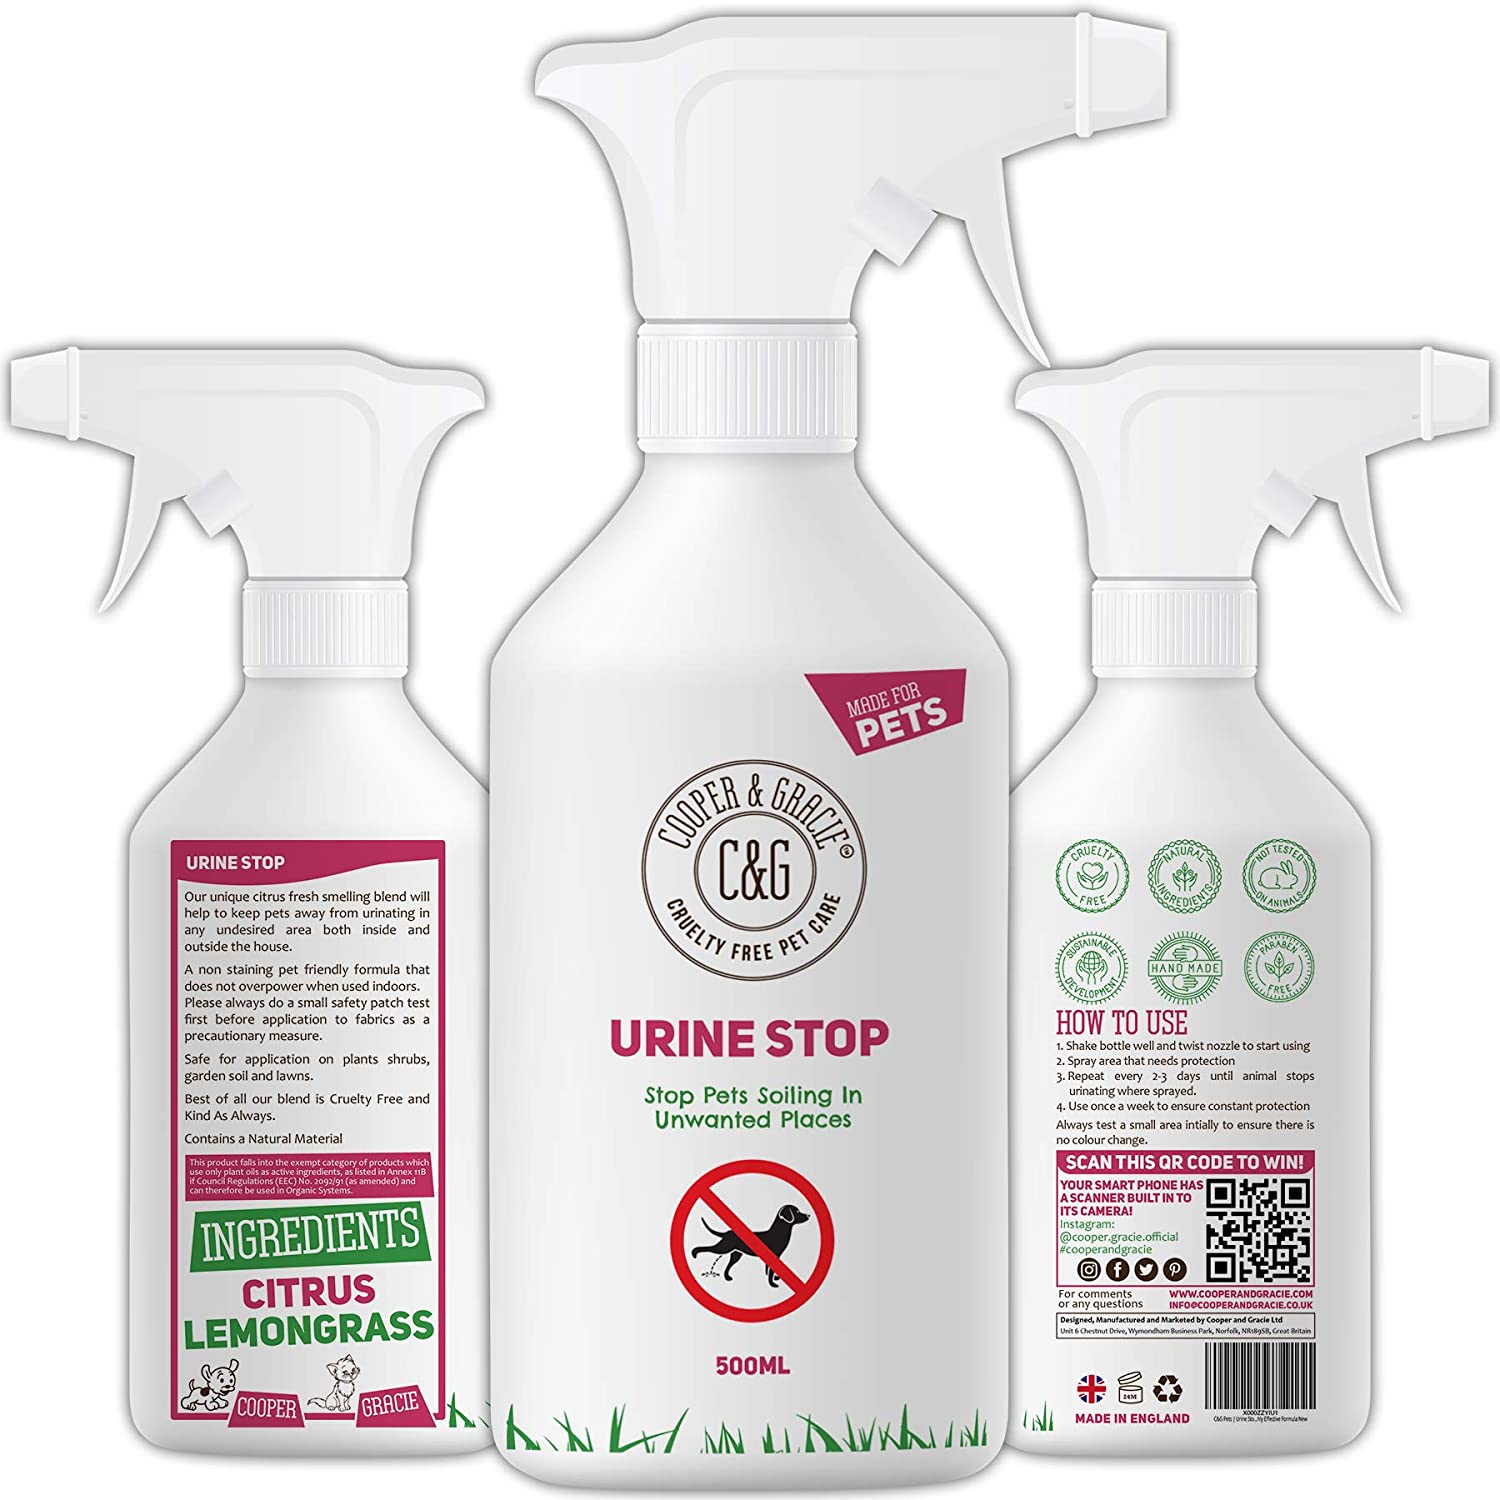 What to spray to keep dogs from marking?